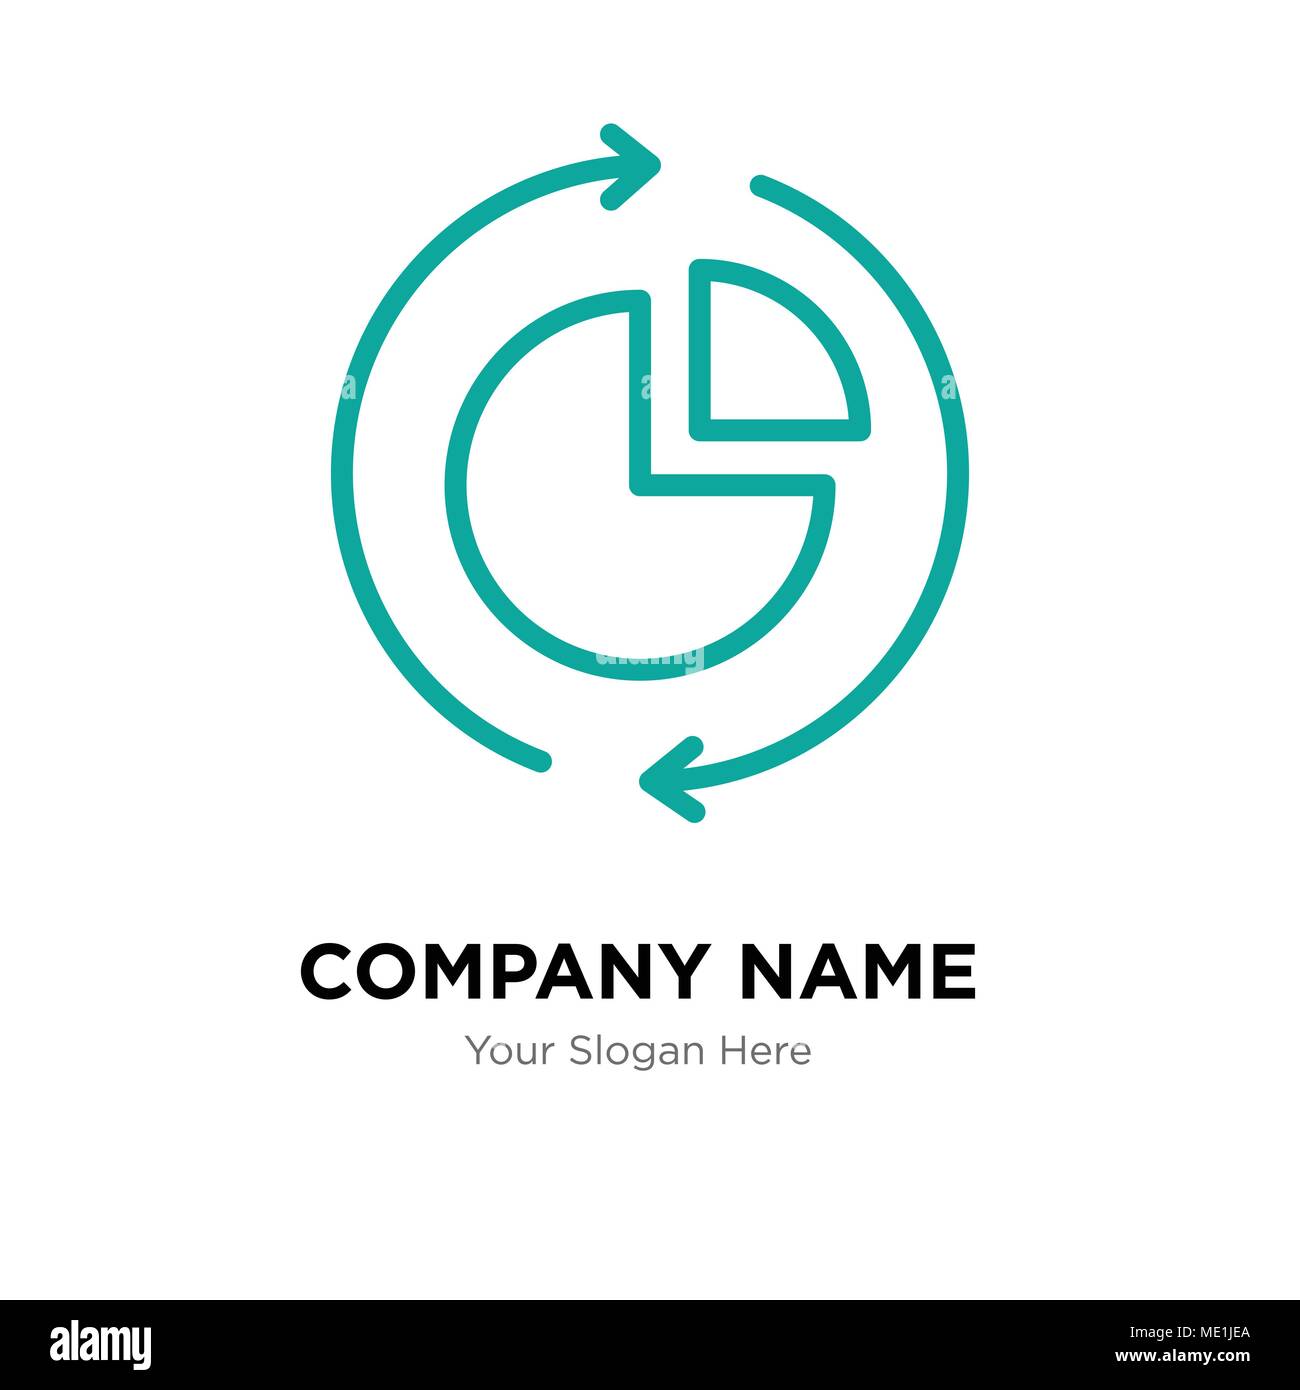 Data analysis pie chart company logo design template, Business corporate vector icon Stock Vector